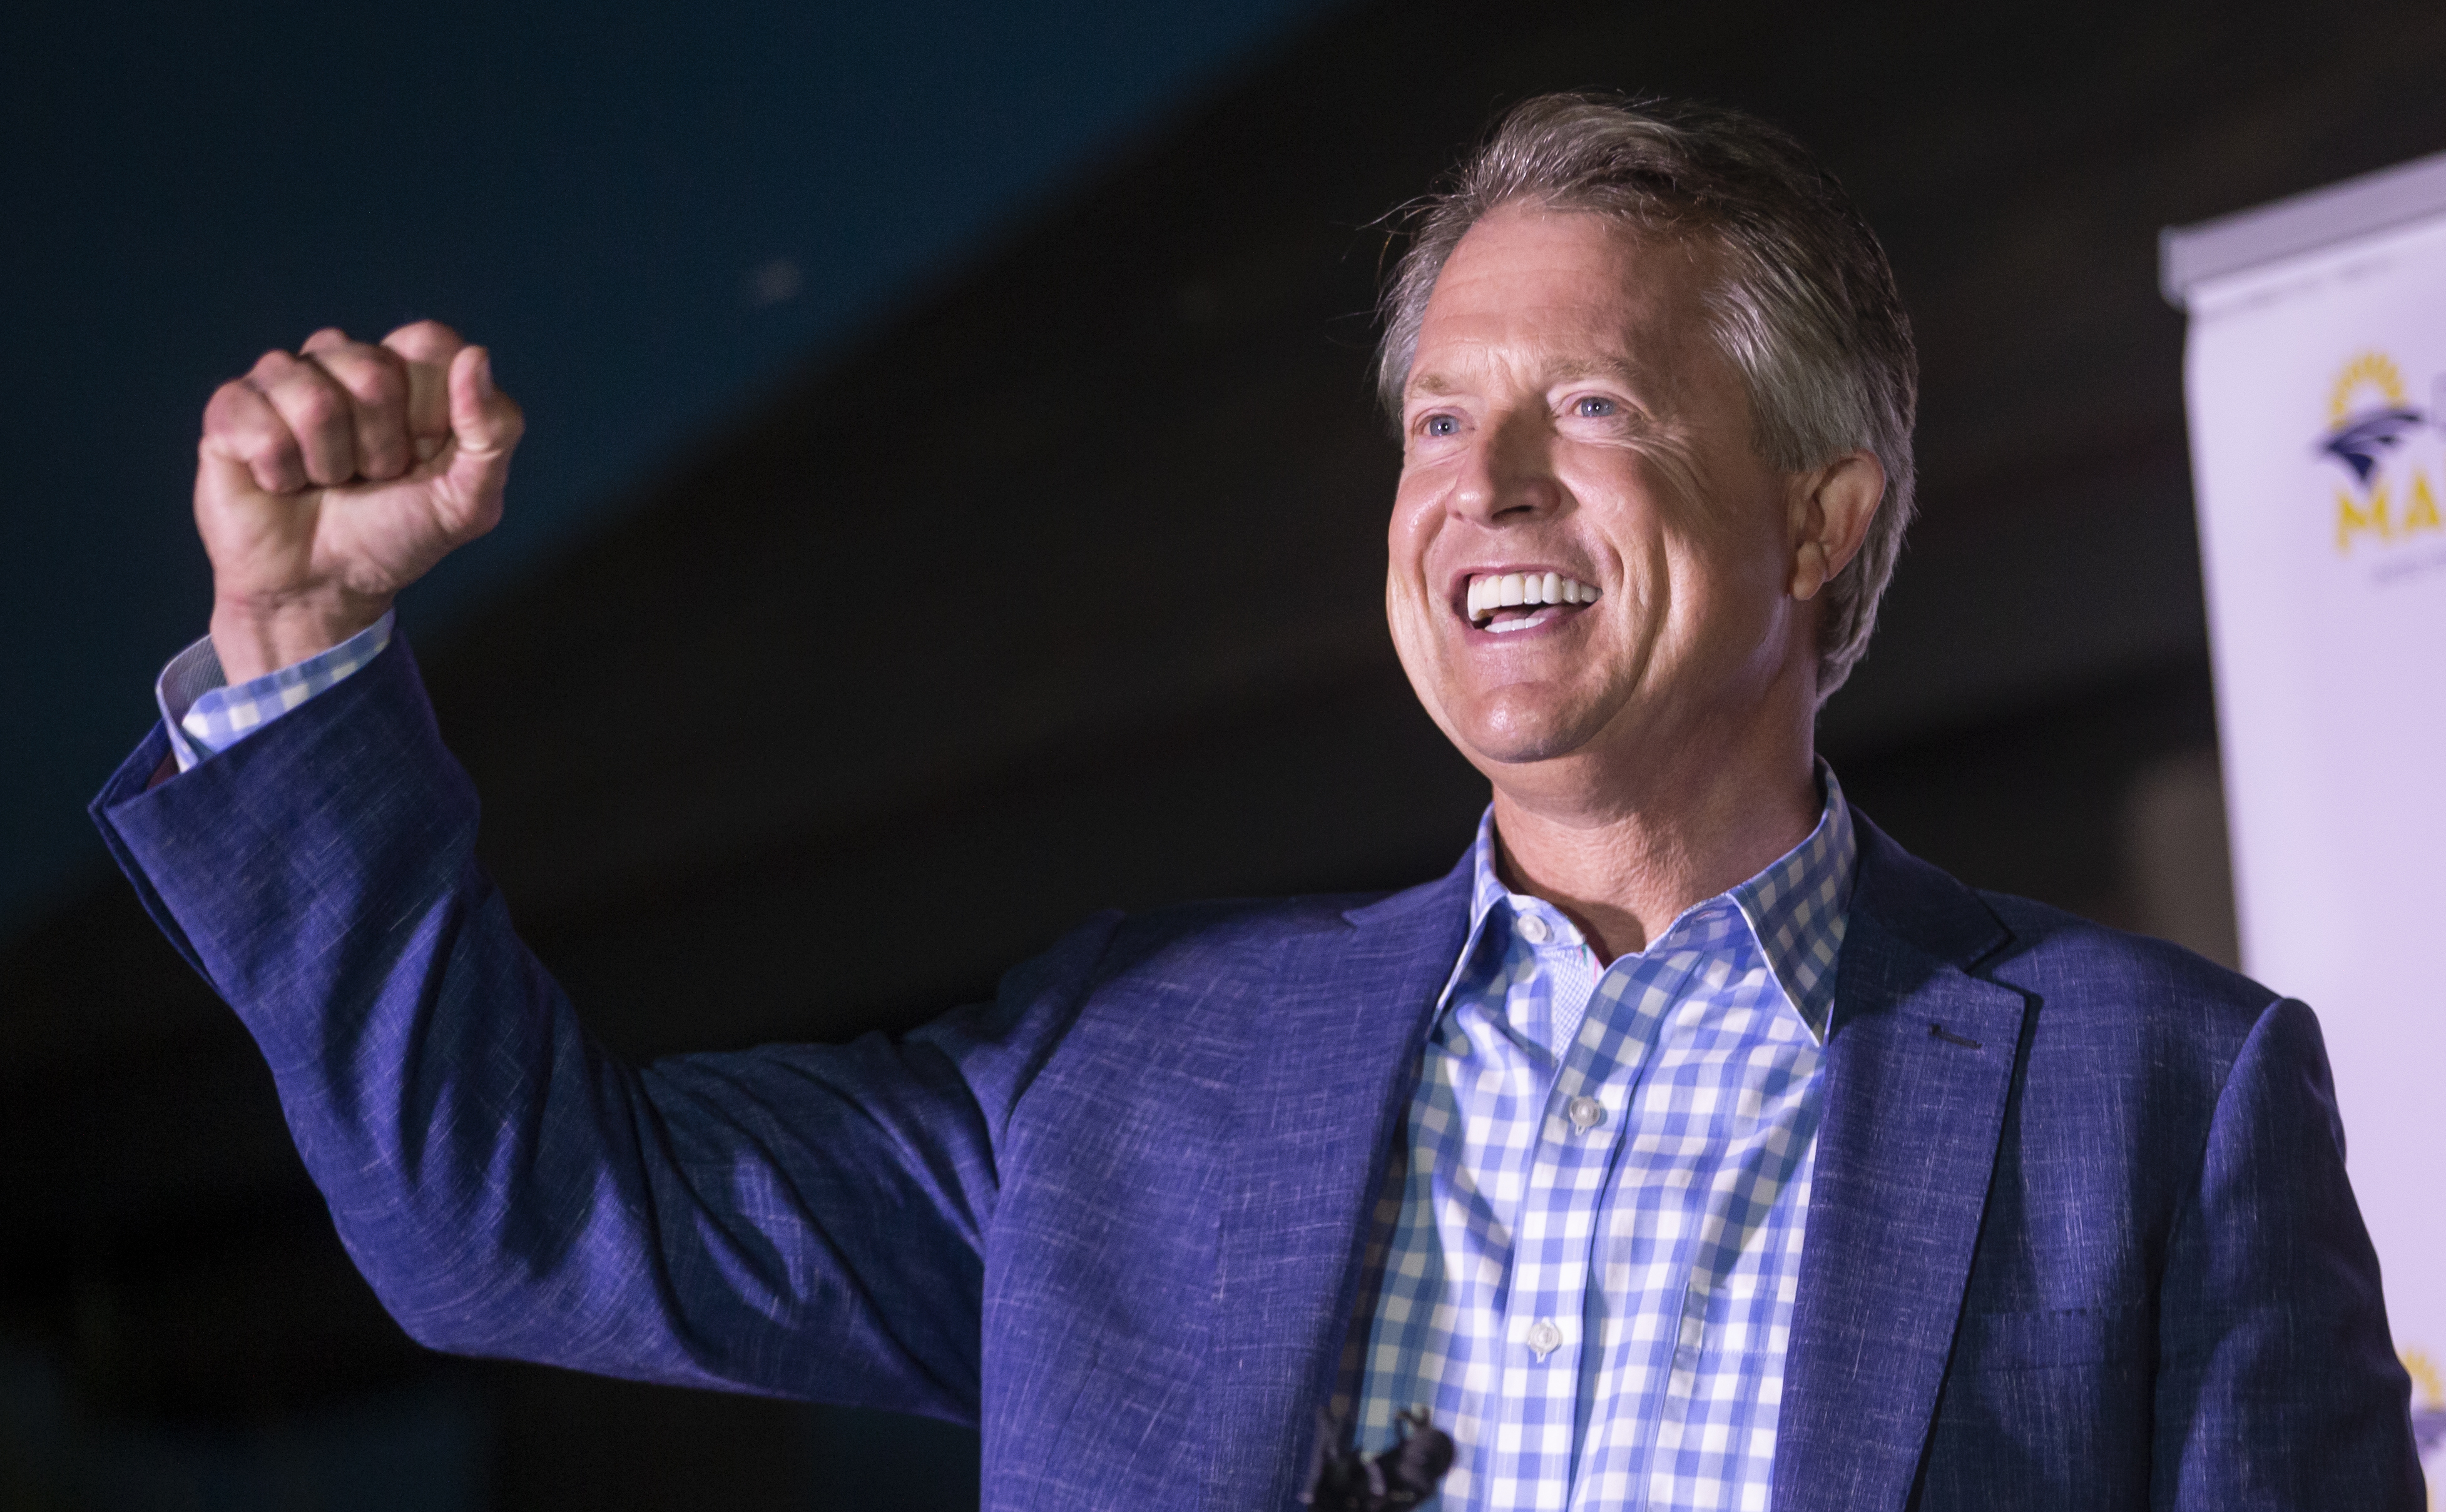 Roger Marshall pumps his fist after speaking to supporters near Pawnee Rock, Kan., Tuesday, Aug. 4, 2020, after defeating Kris Kobach in the Republican primary for U.S. Senate.